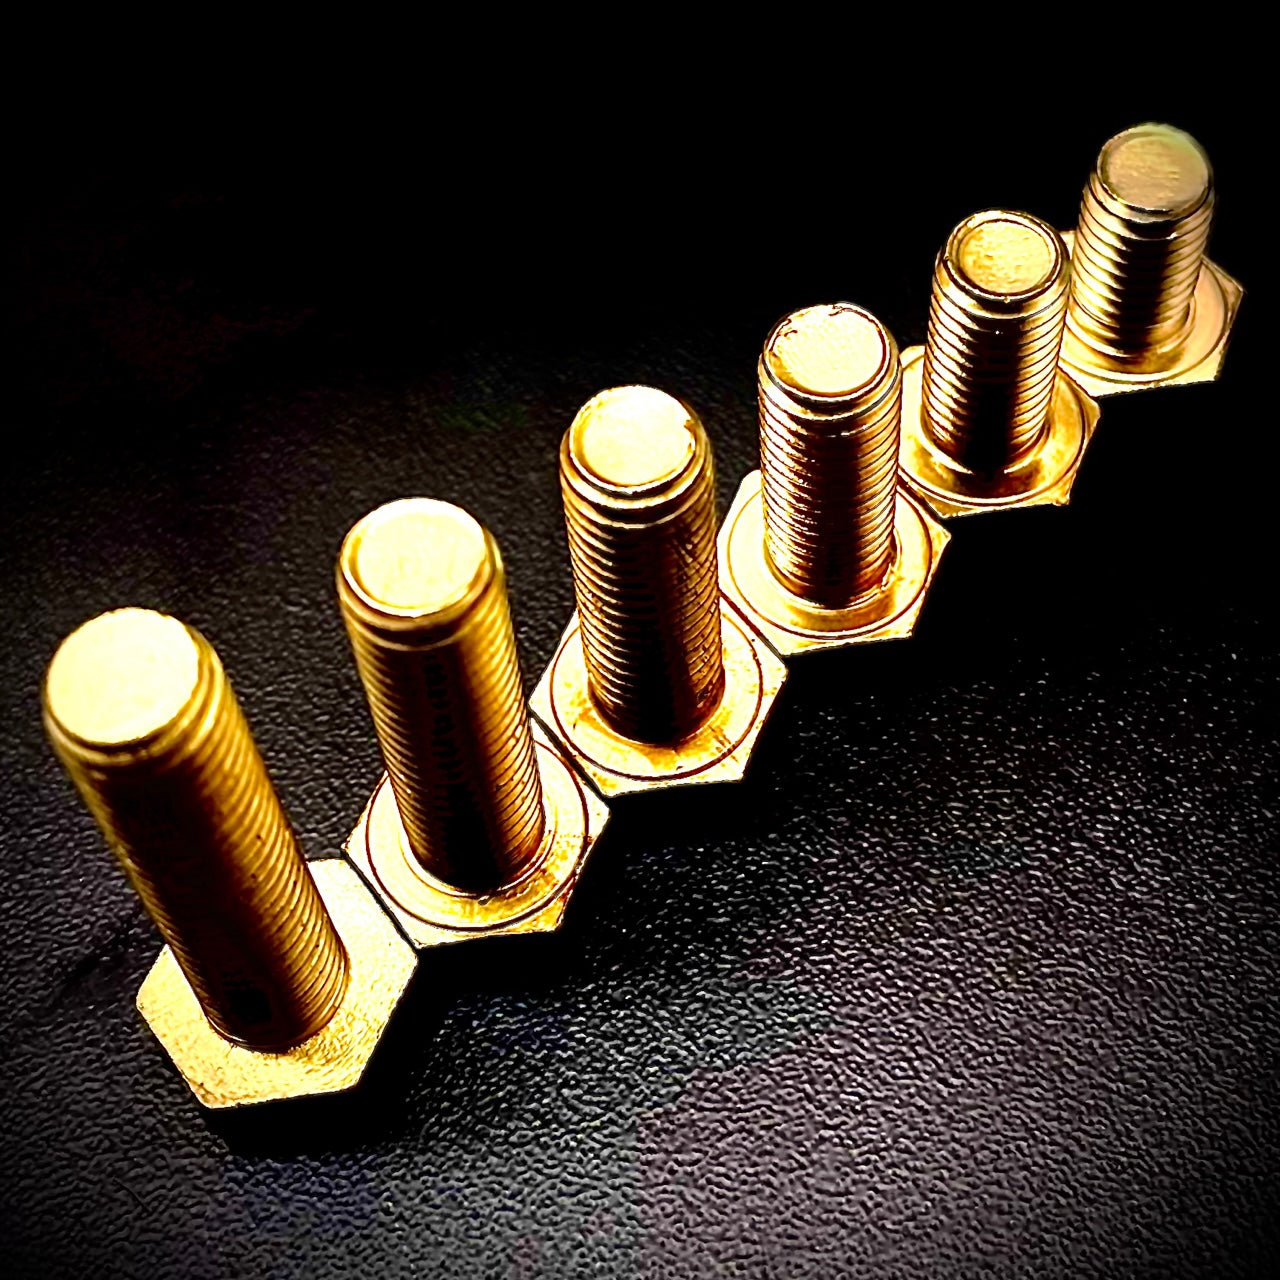 M8 Brass Hex Set Screw Fully Threaded Bolt DIN933 - Fixaball Ltd. Fixings and Fasteners UK